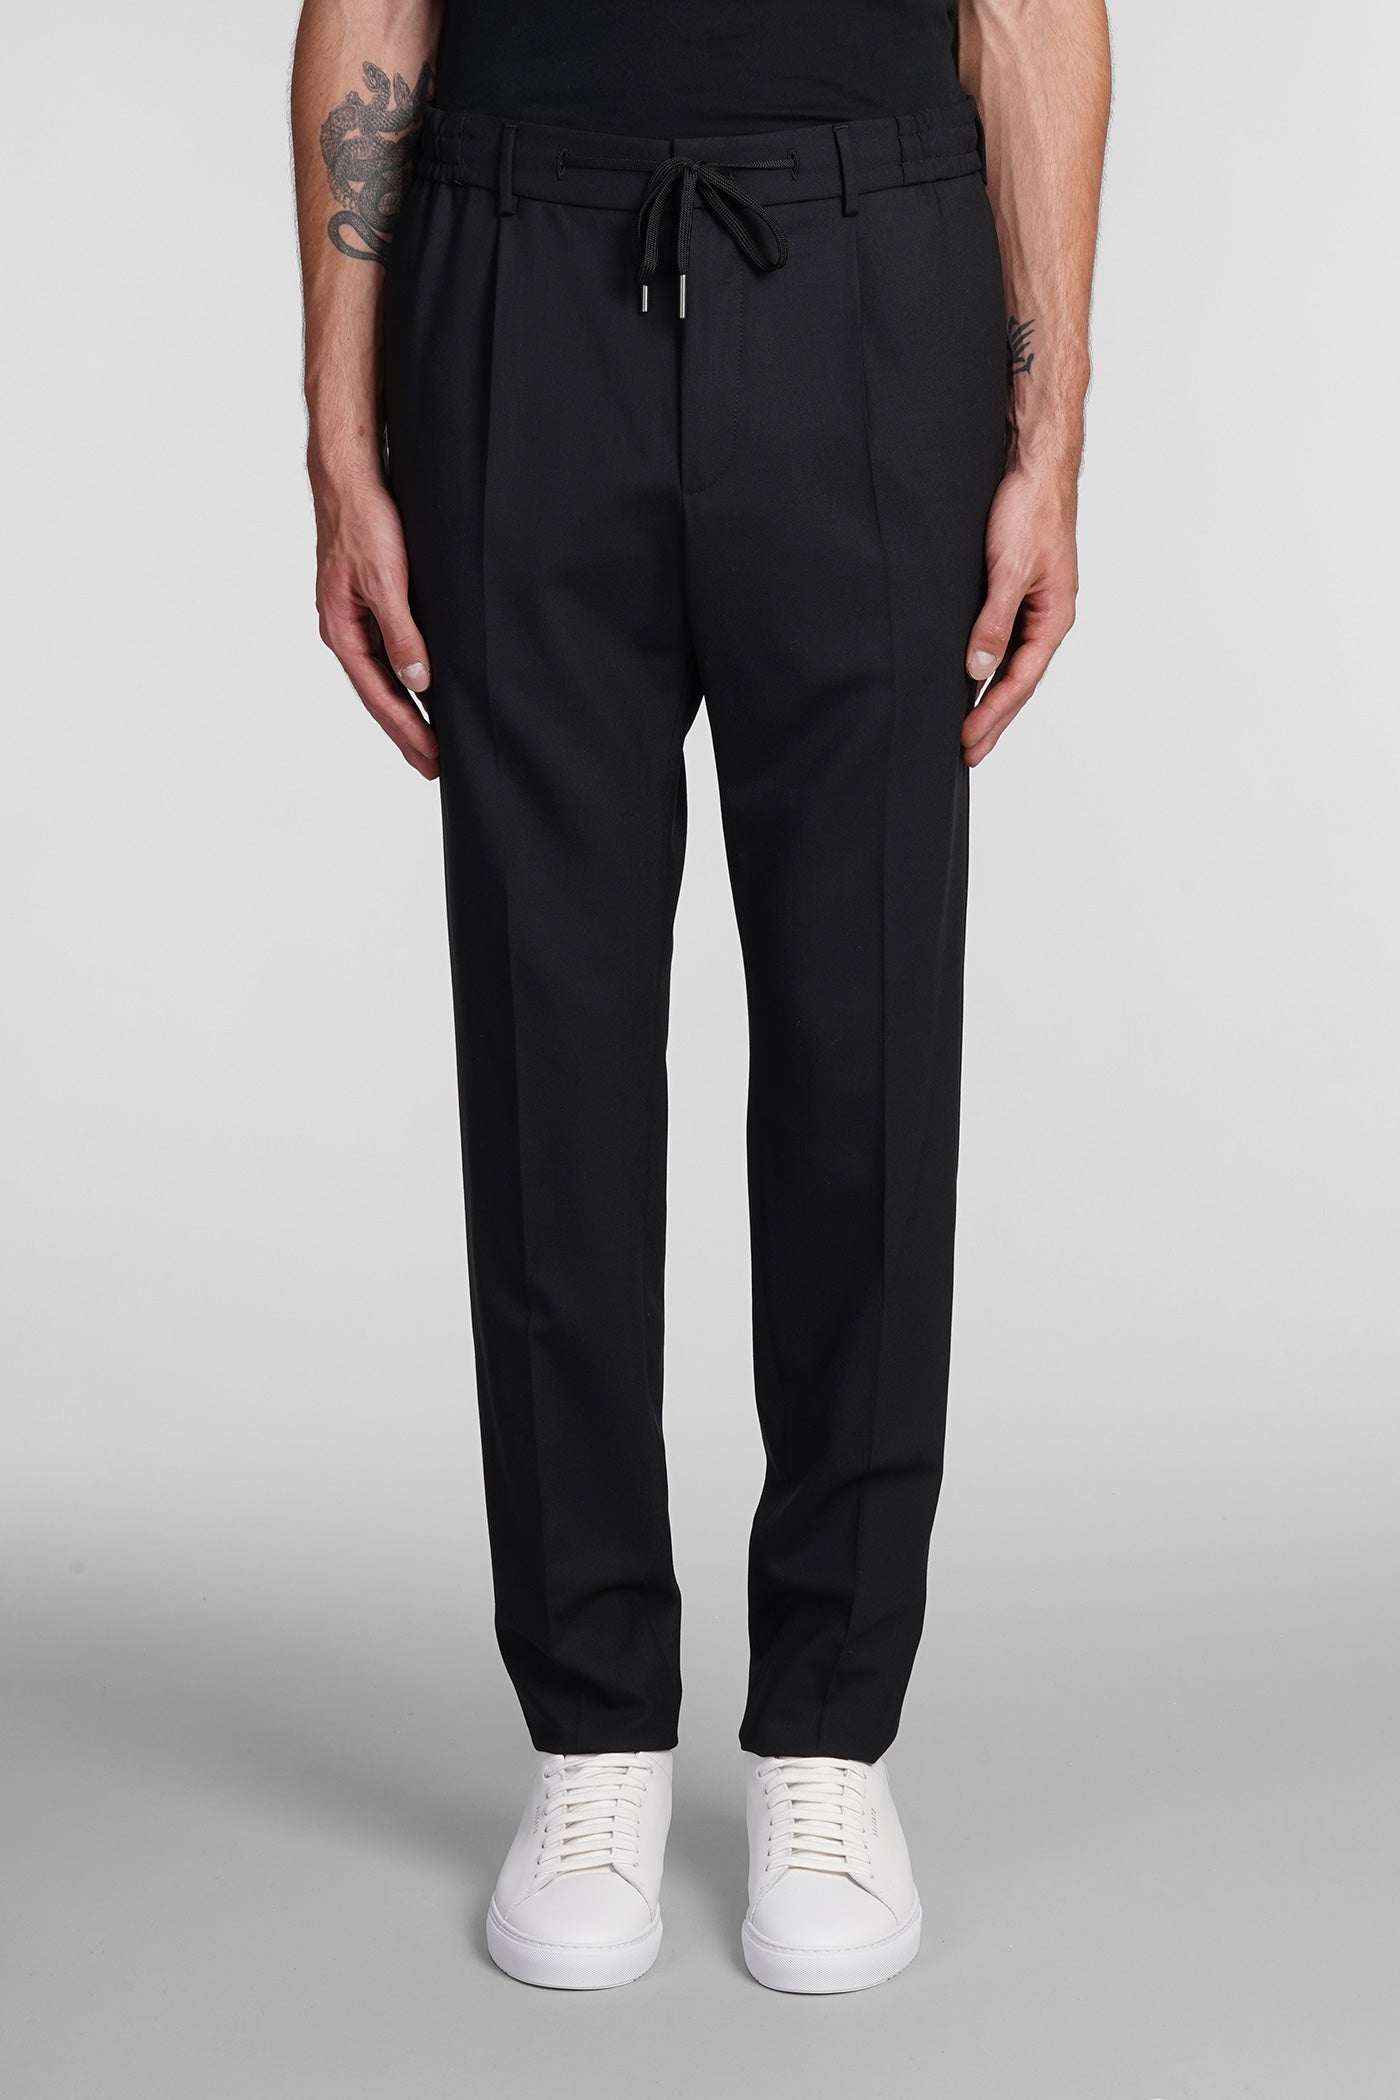 Tagliatore 0205 - Pants in black polyester